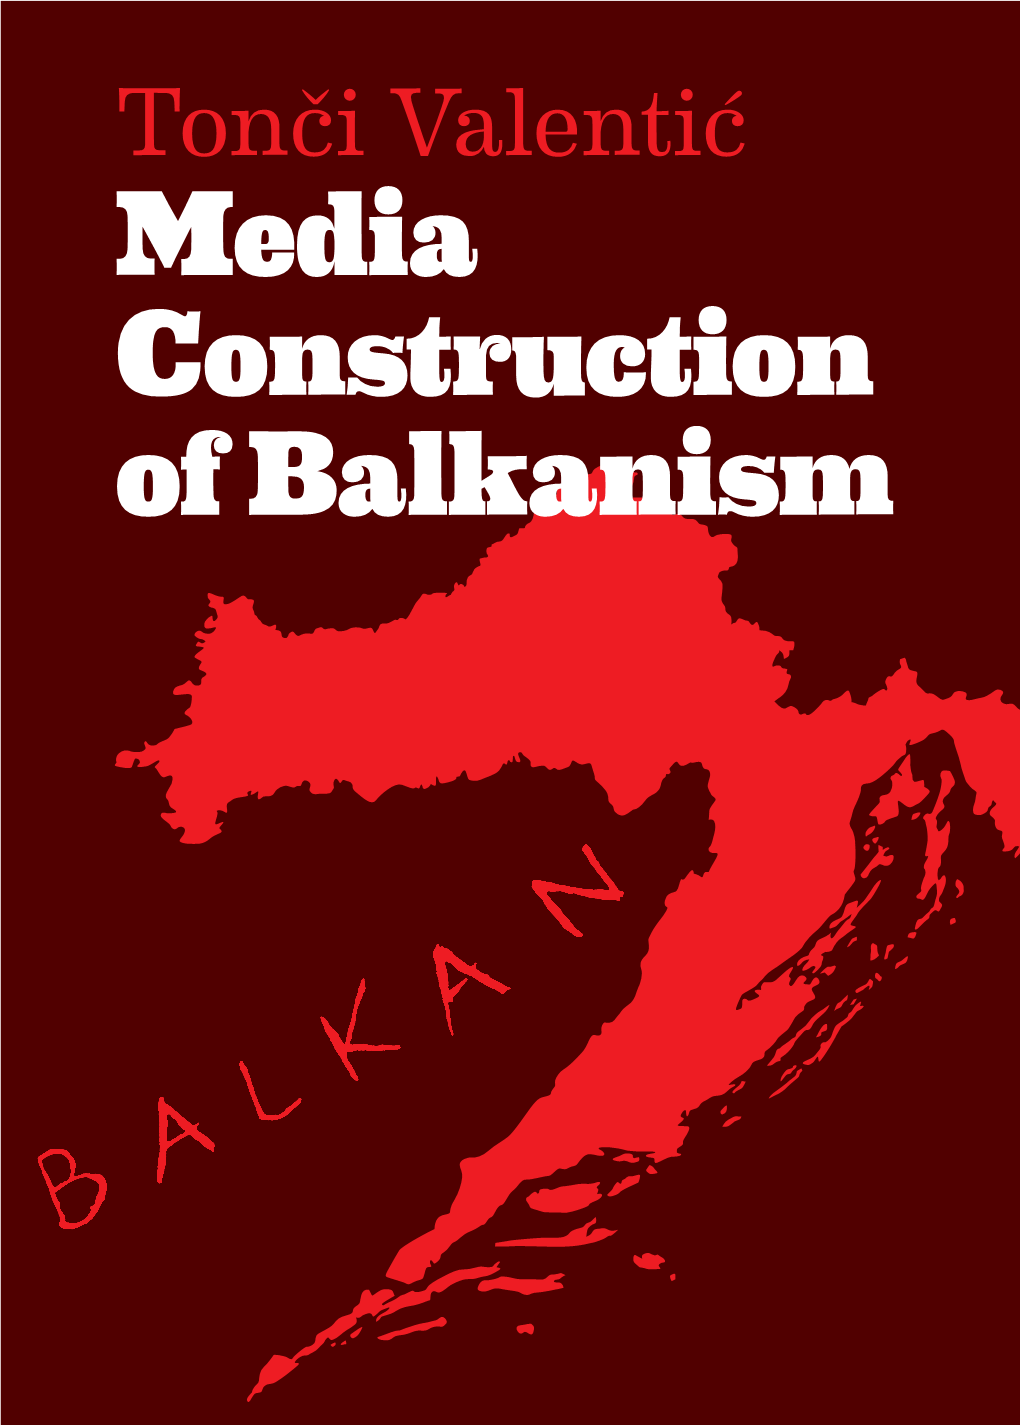 Media Construction of Balkanism This Work Is Licensed Under a Creative Commons Attribution-Noncommercial 4.0 International License